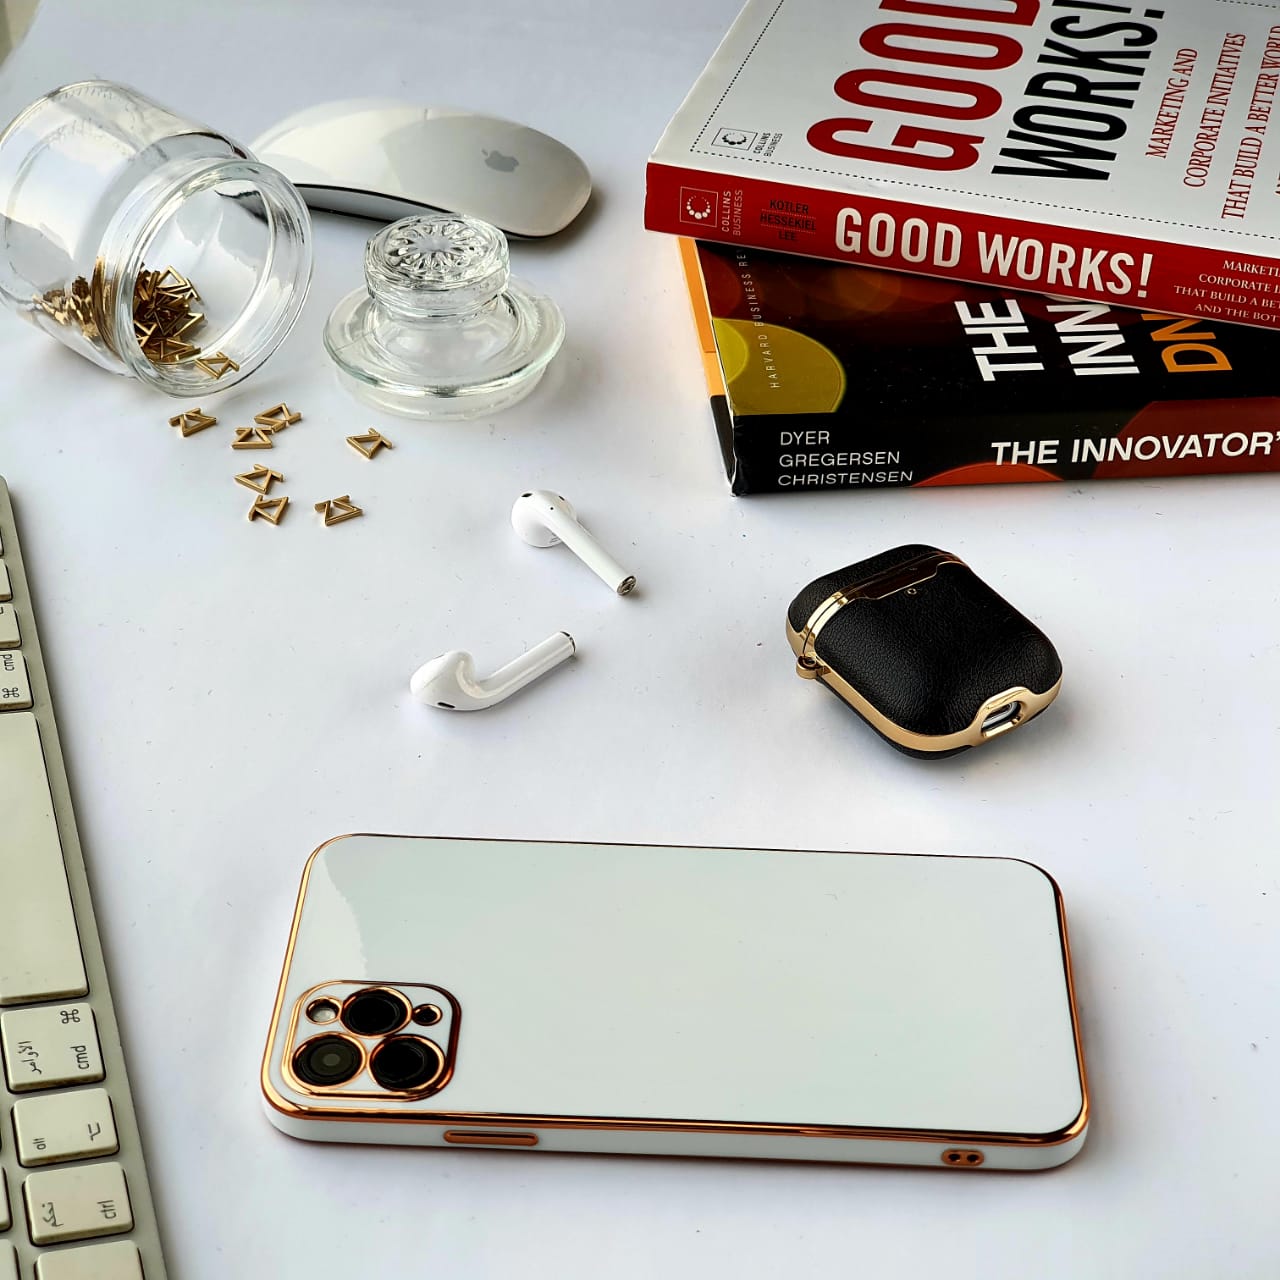 White Glossy iPhone Case with Gold Detail